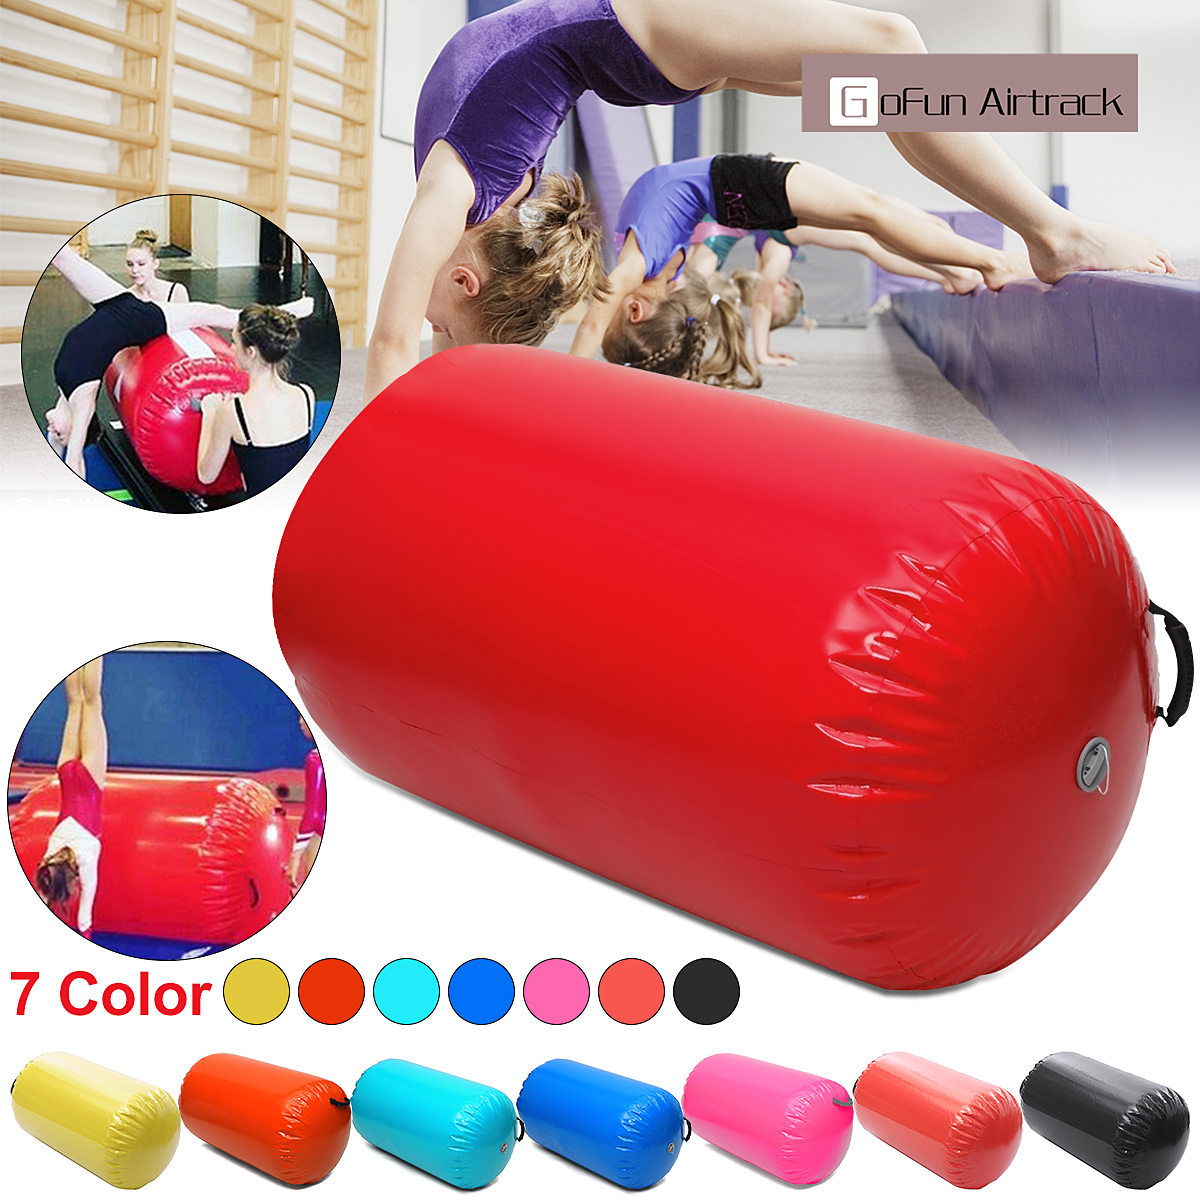 255x393inch-Inflatable-Airtrack-Home-Roller-Small-Airtrack-Gymnastics-Mat-Cylinder-Gym-Training-1253071-1